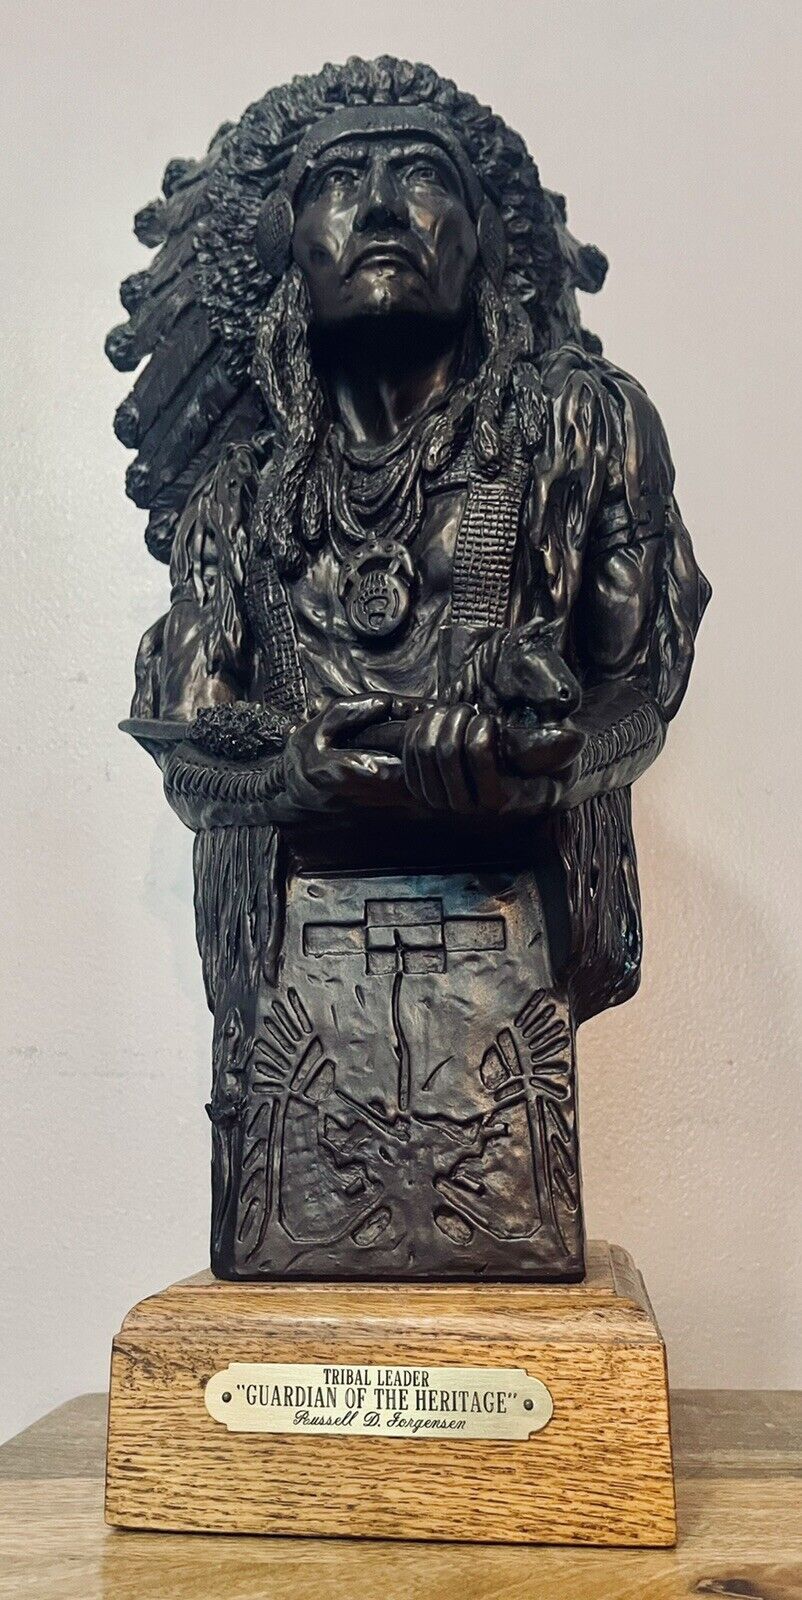 Russell D Jorgensen Tribal Leader “Guardian of The Heritage” Bronzed Sculpture